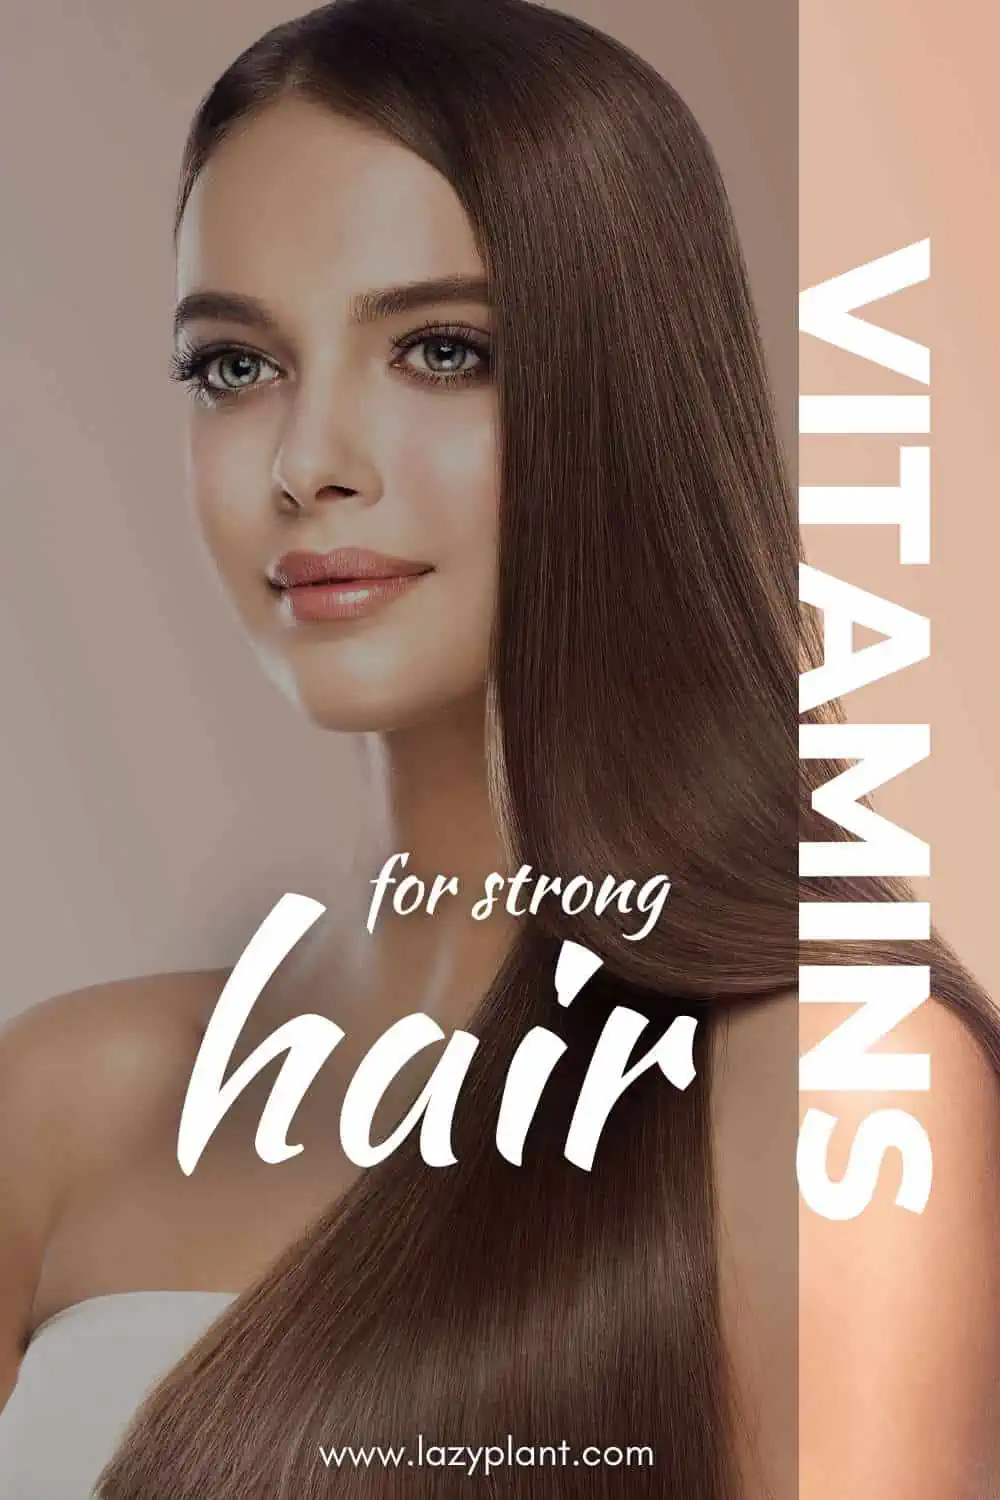 Vitamins for strong hair